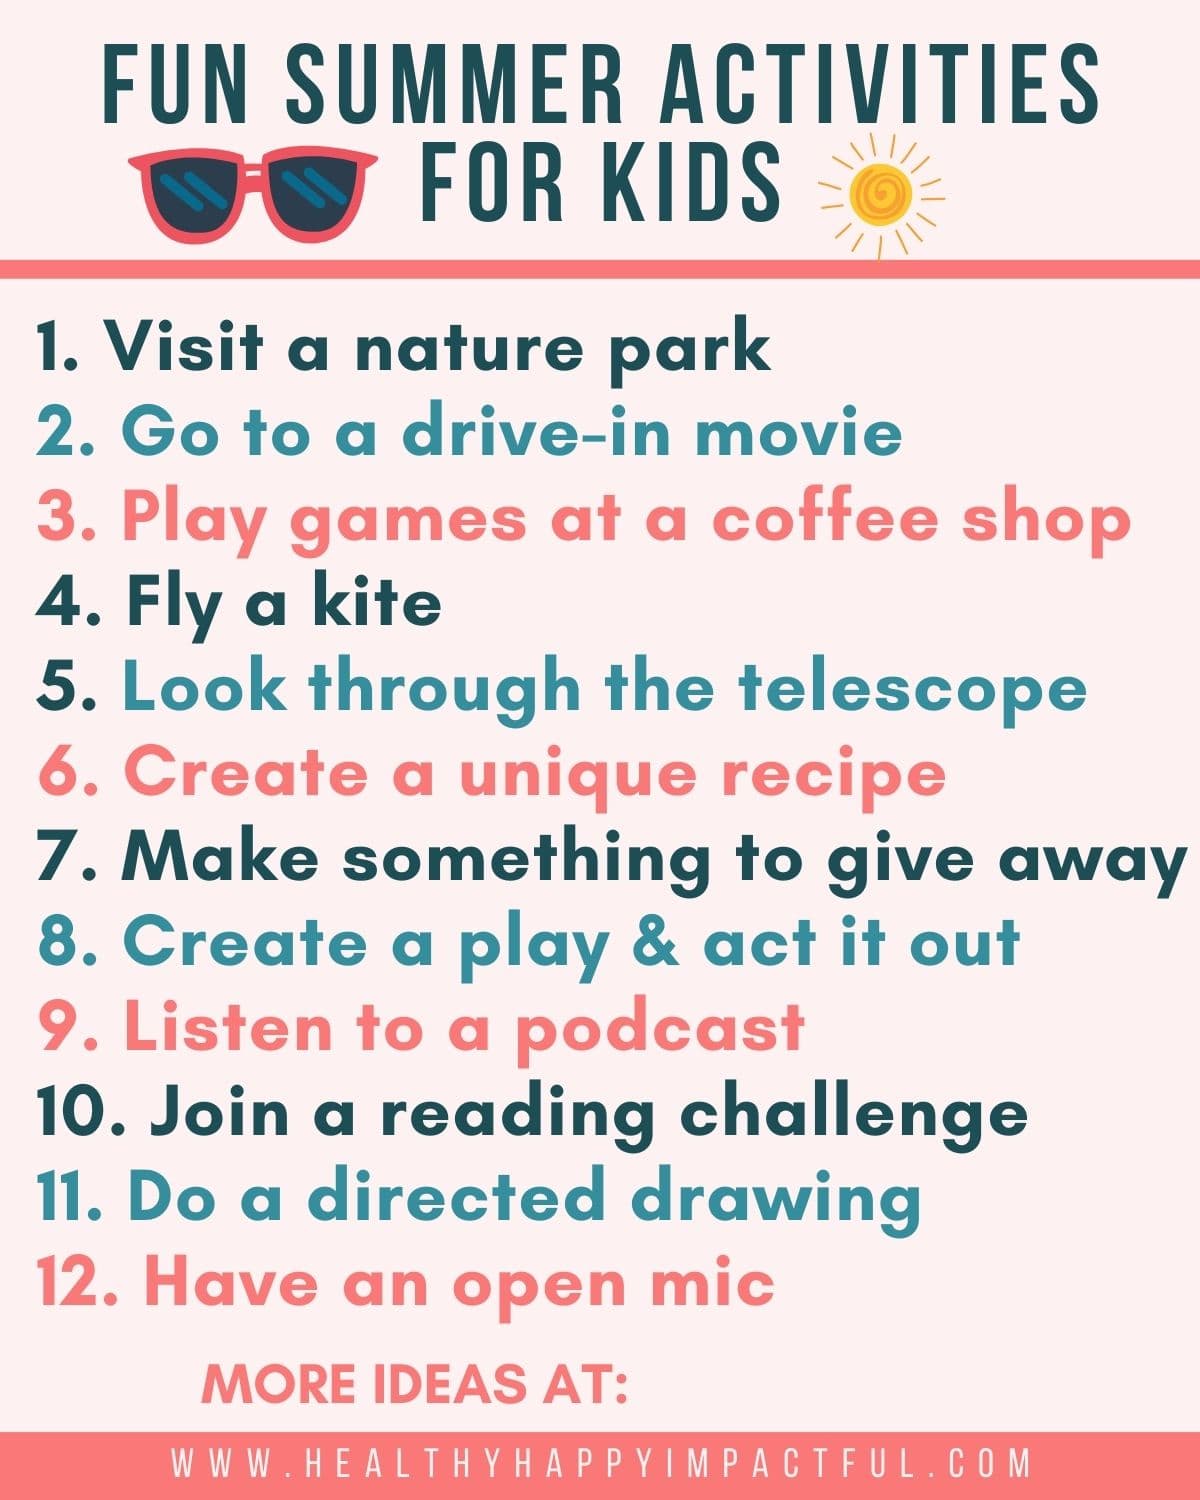 fun summer activities for teens and kids near me; things to do in the summer